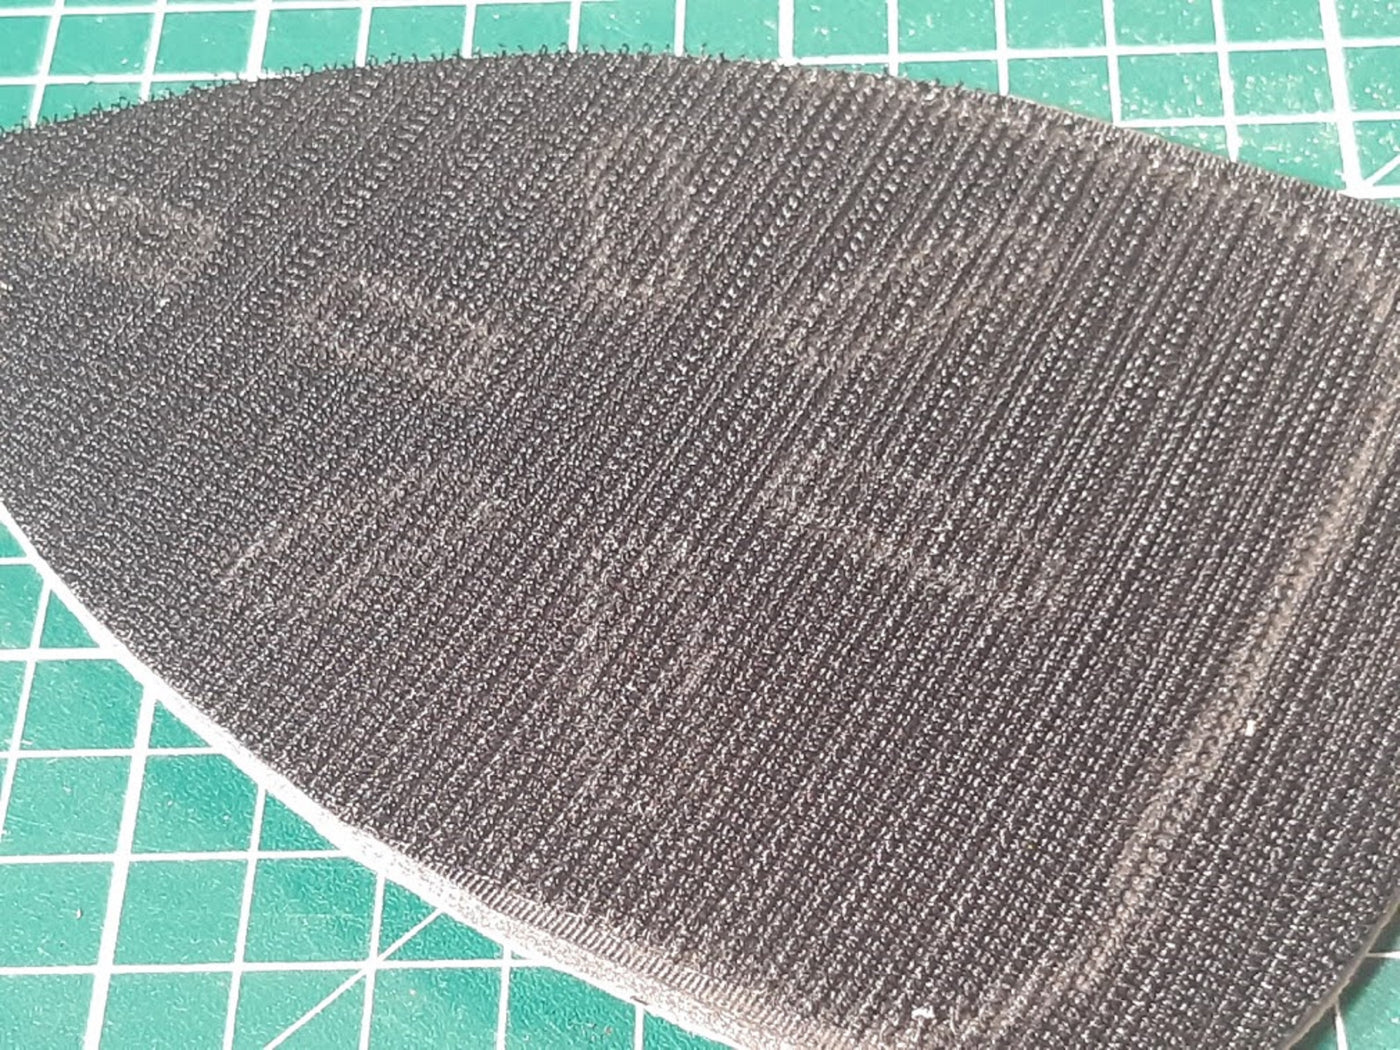 6 x Replacement Hook Pads with 3mm foam backing for detail sanders and palm sanders